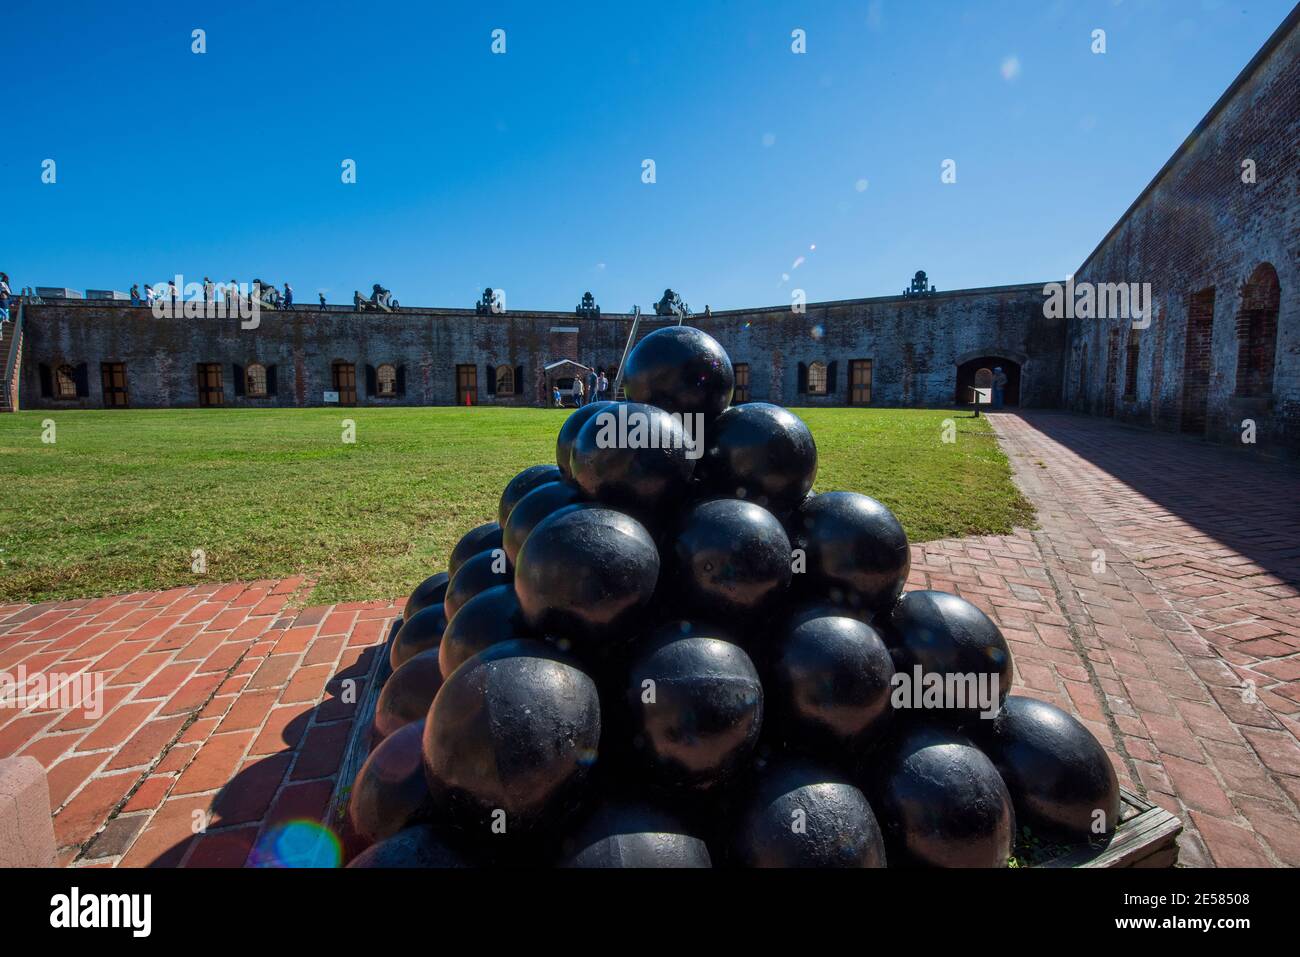 A pyramid of cannonballs at Fort Macon State Park in Atlantic Beach, NC. Fort Macon was constructed after the War of 1812 to defend Beaufort Harbor. T Stock Photo